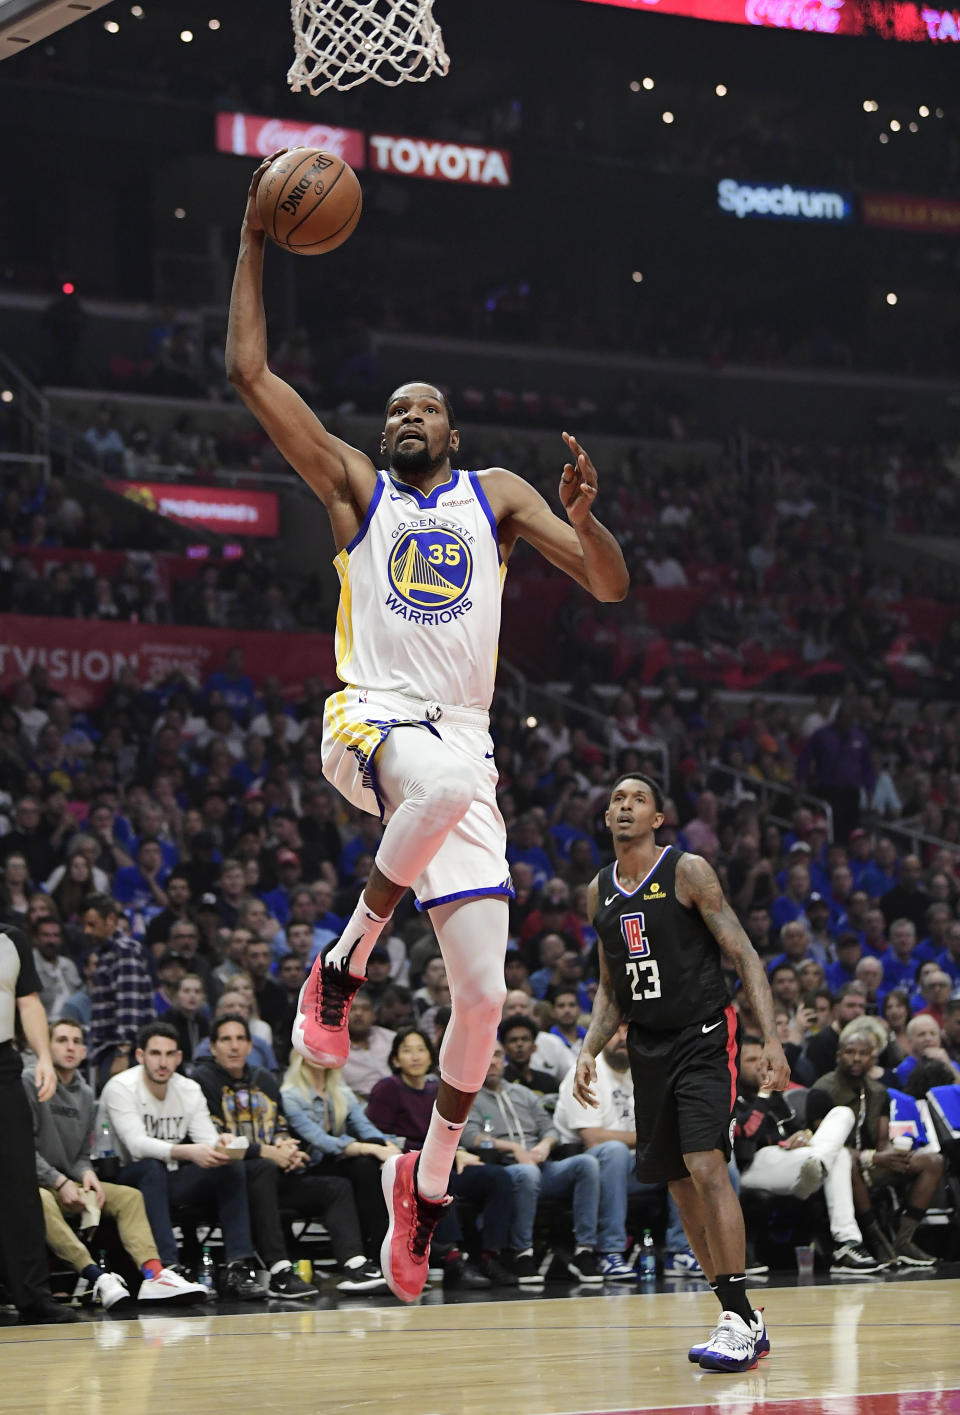 Golden State Warriors forward Kevin Durant, left, shoots as Los Angeles Clippers guard Lou Williams defends during the first half in Game 6 of a first-round NBA basketball playoff series Friday, April 26, 2019, in Los Angeles. (AP Photo/Mark J. Terrill)